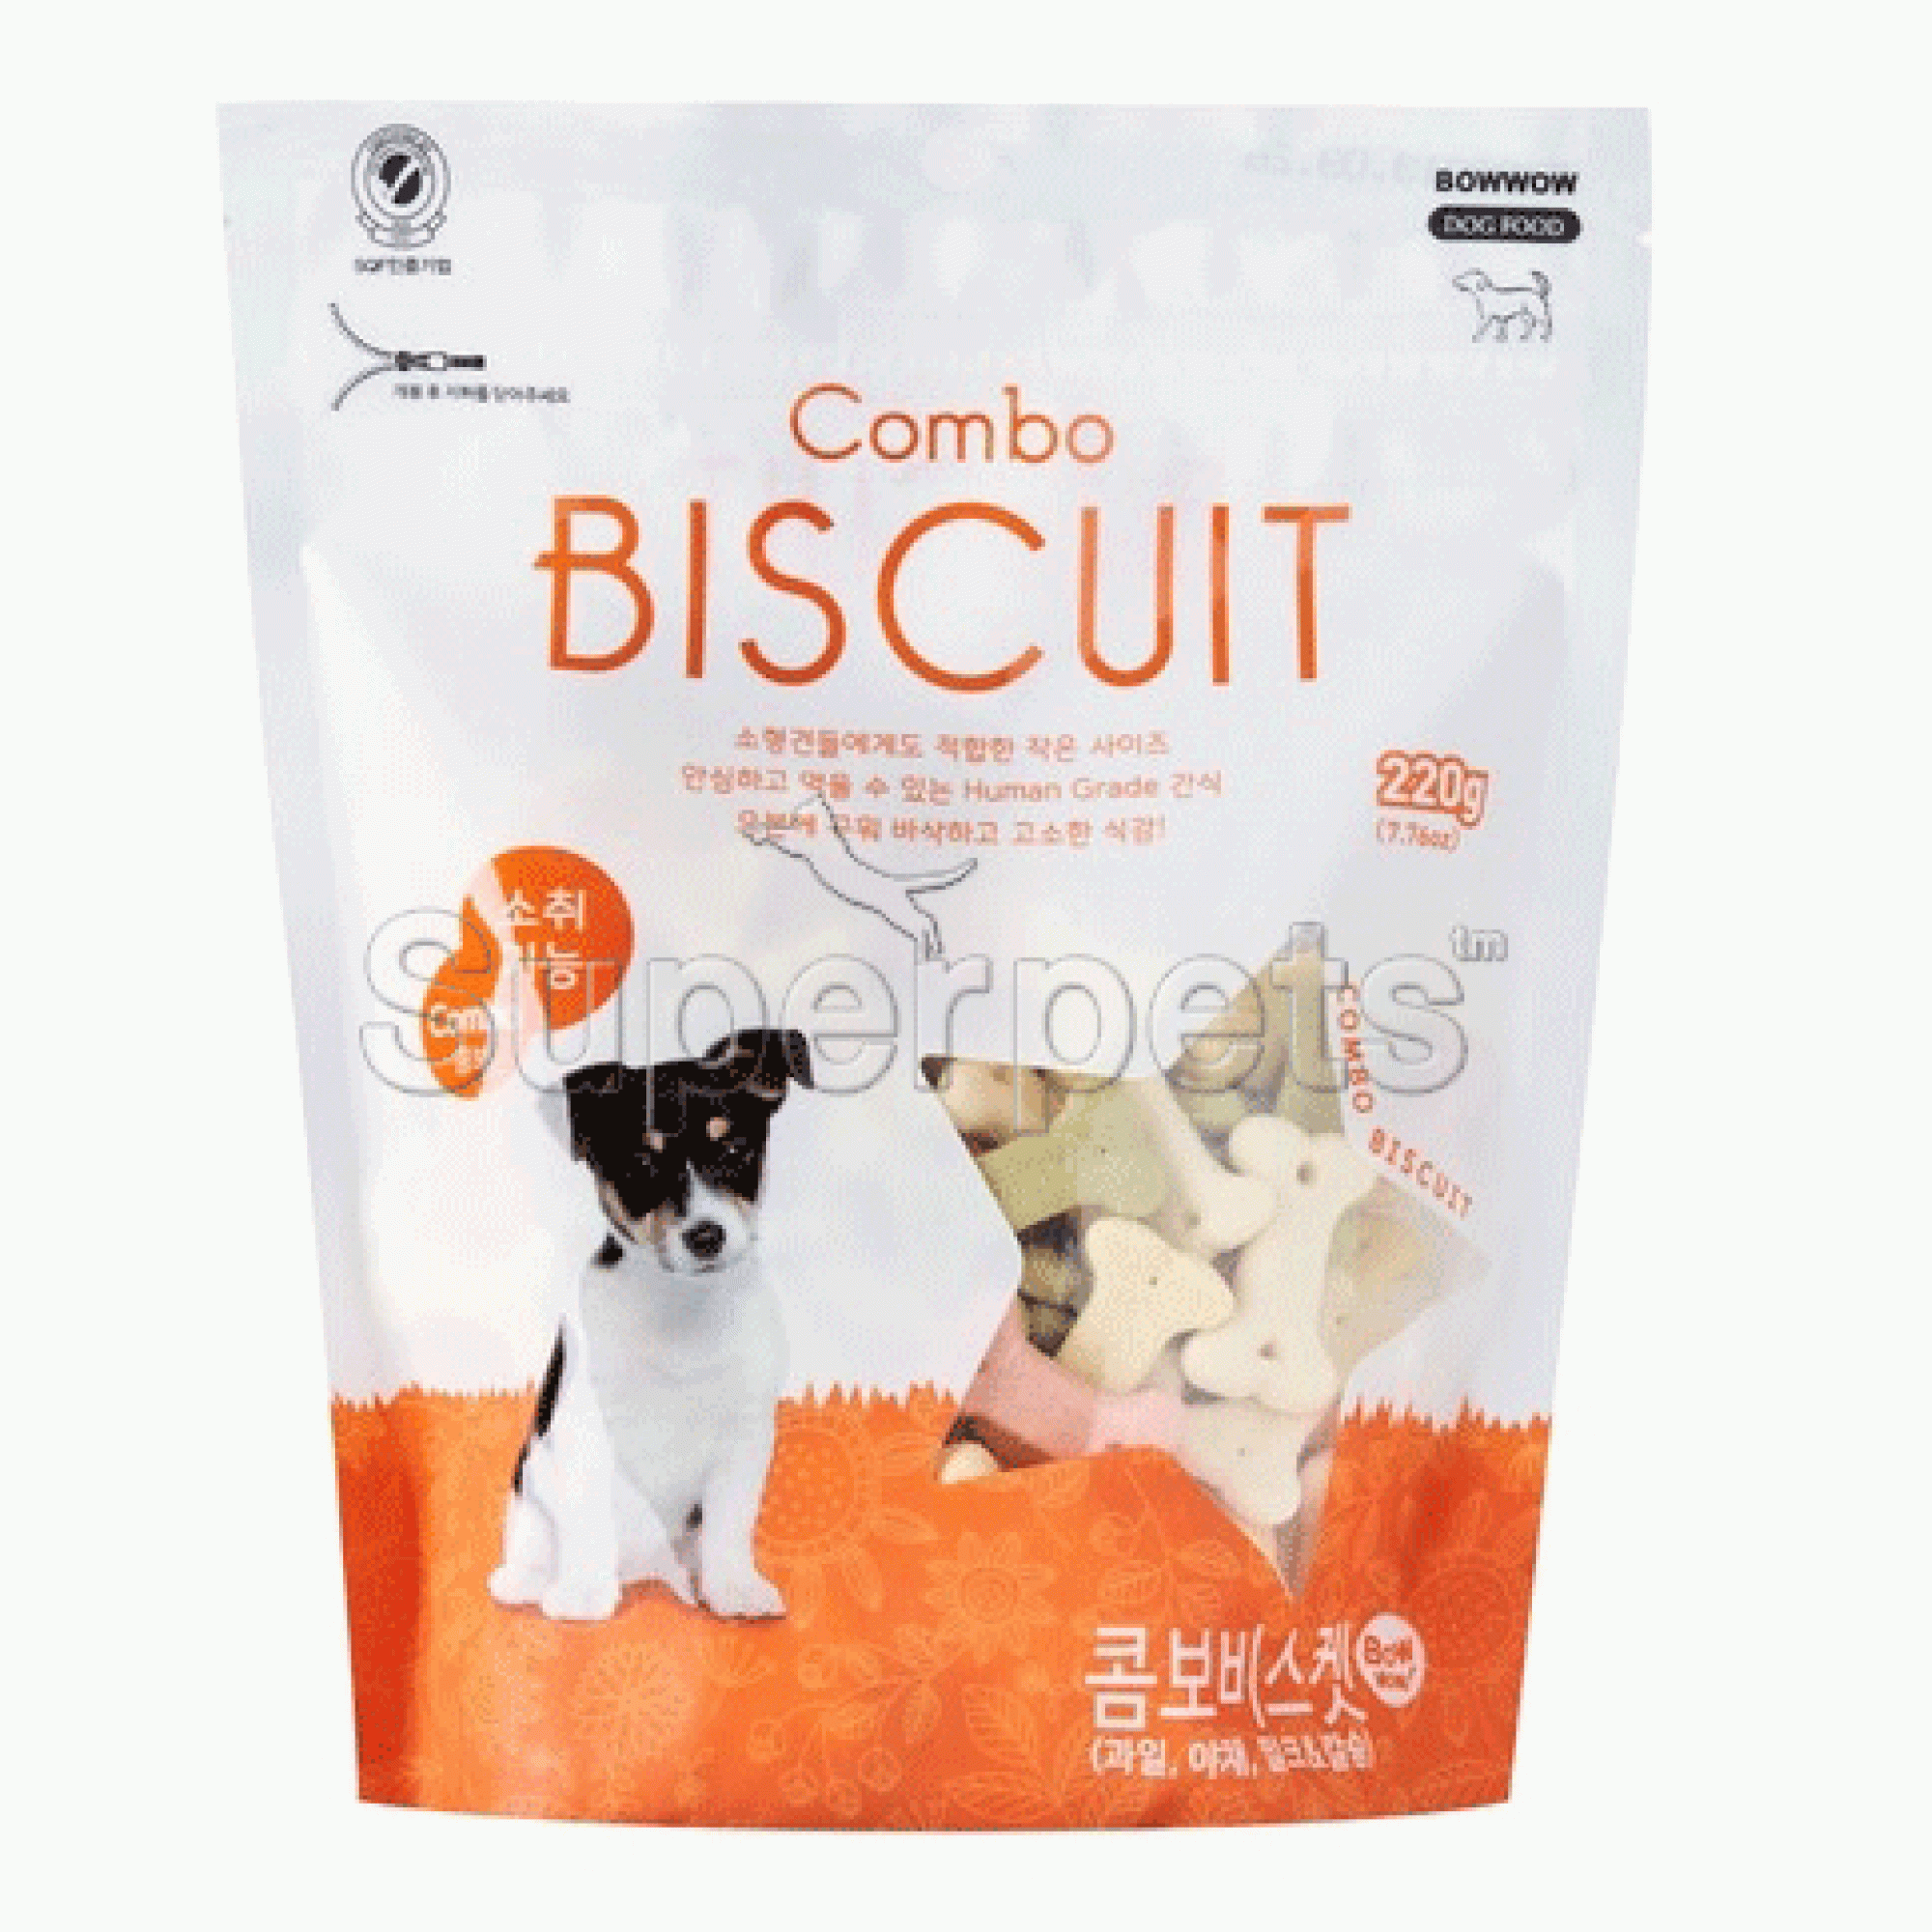 Bow Wow - 2025 Combo Biscuit 220g